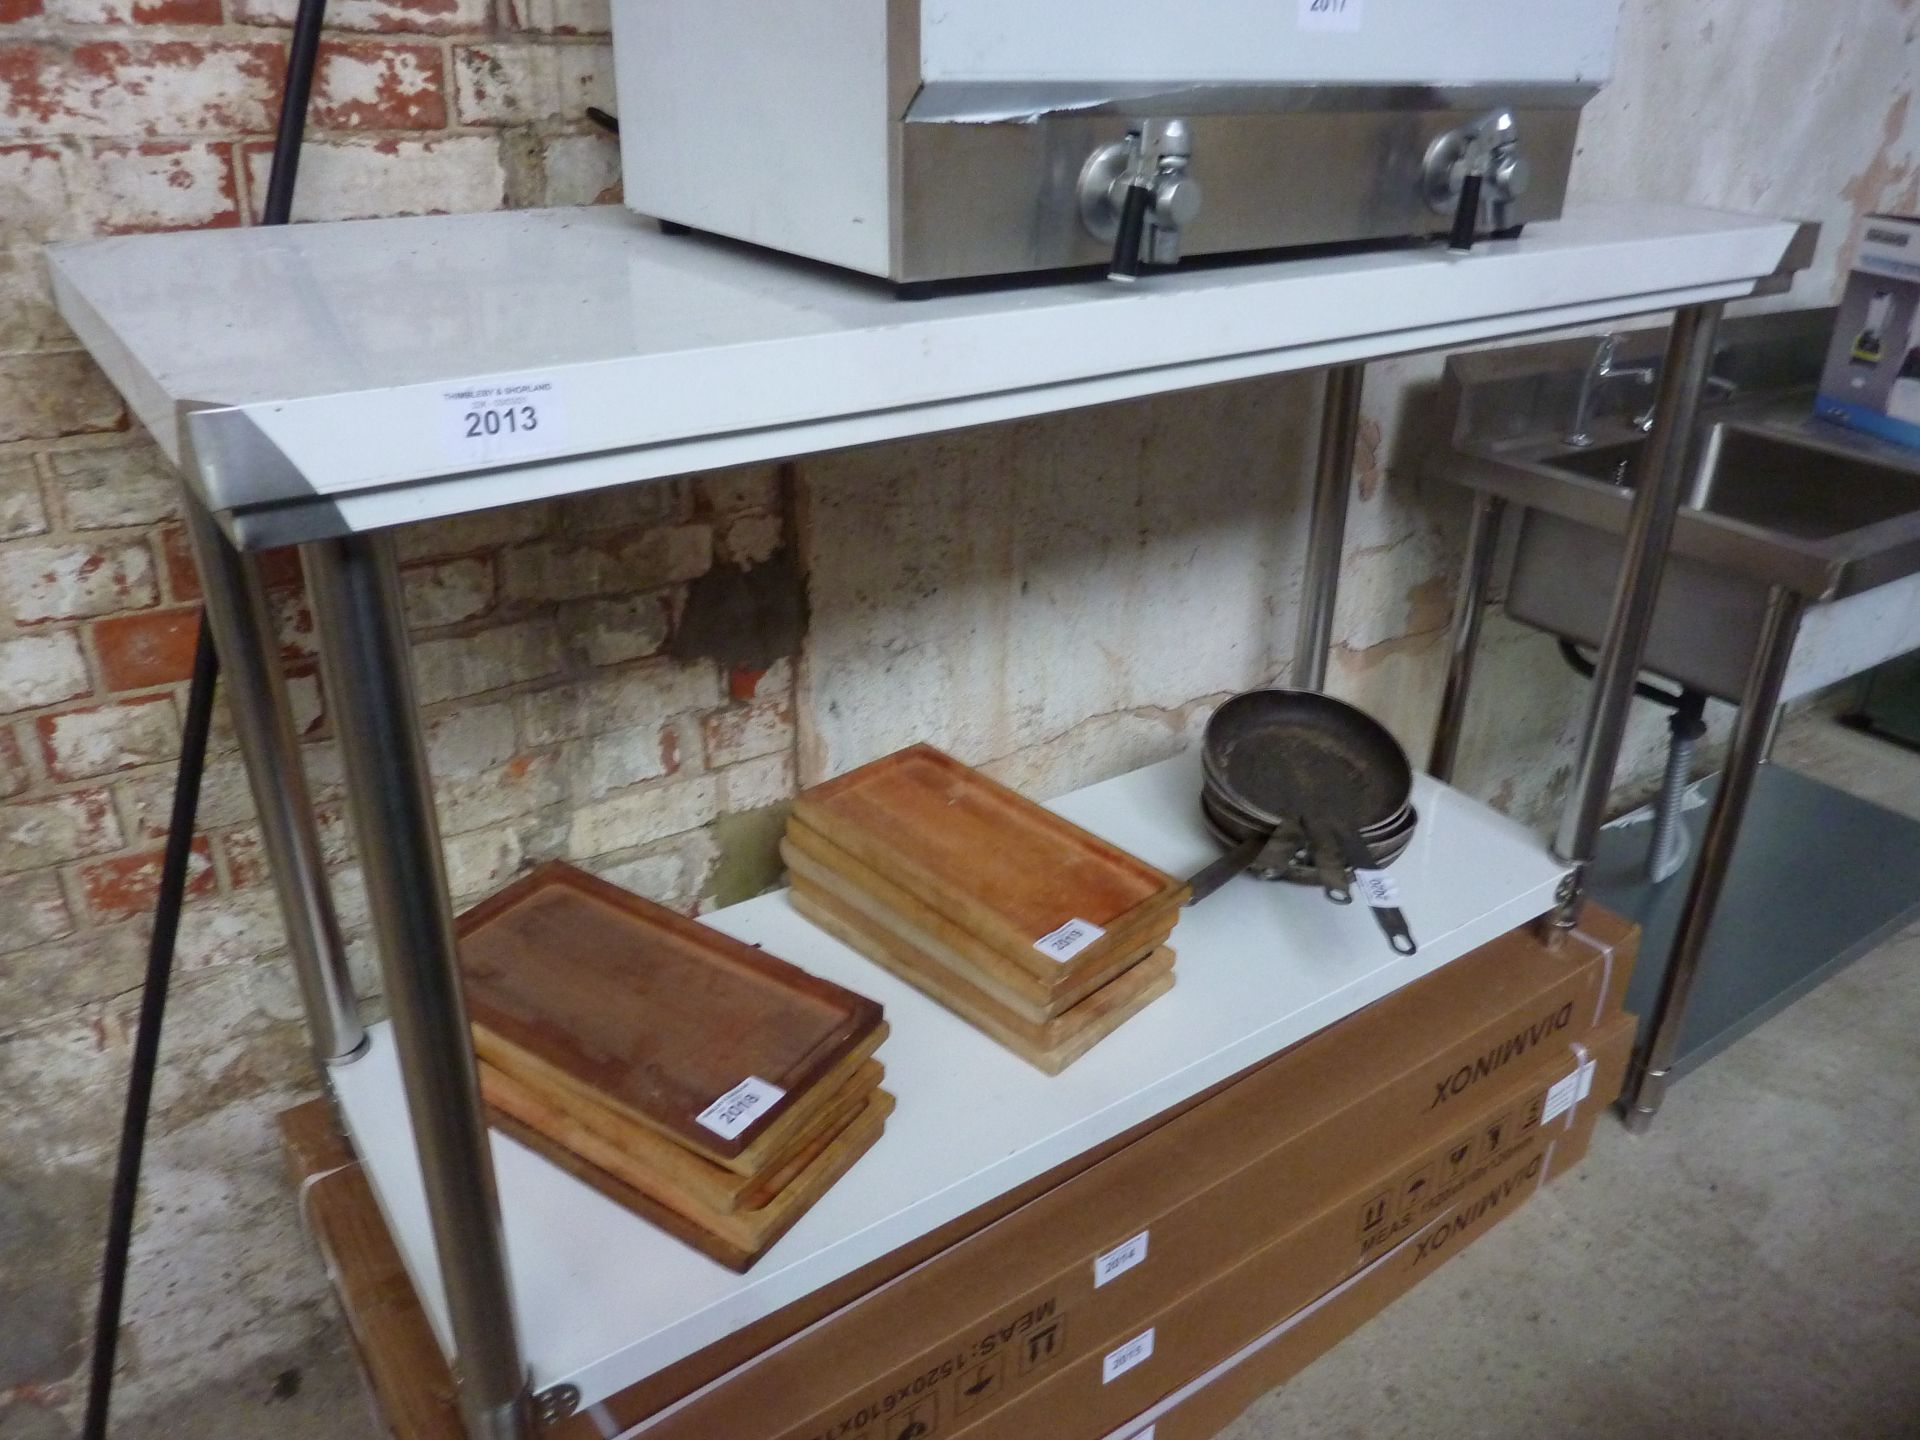 New stainless steel prep table with under shelf